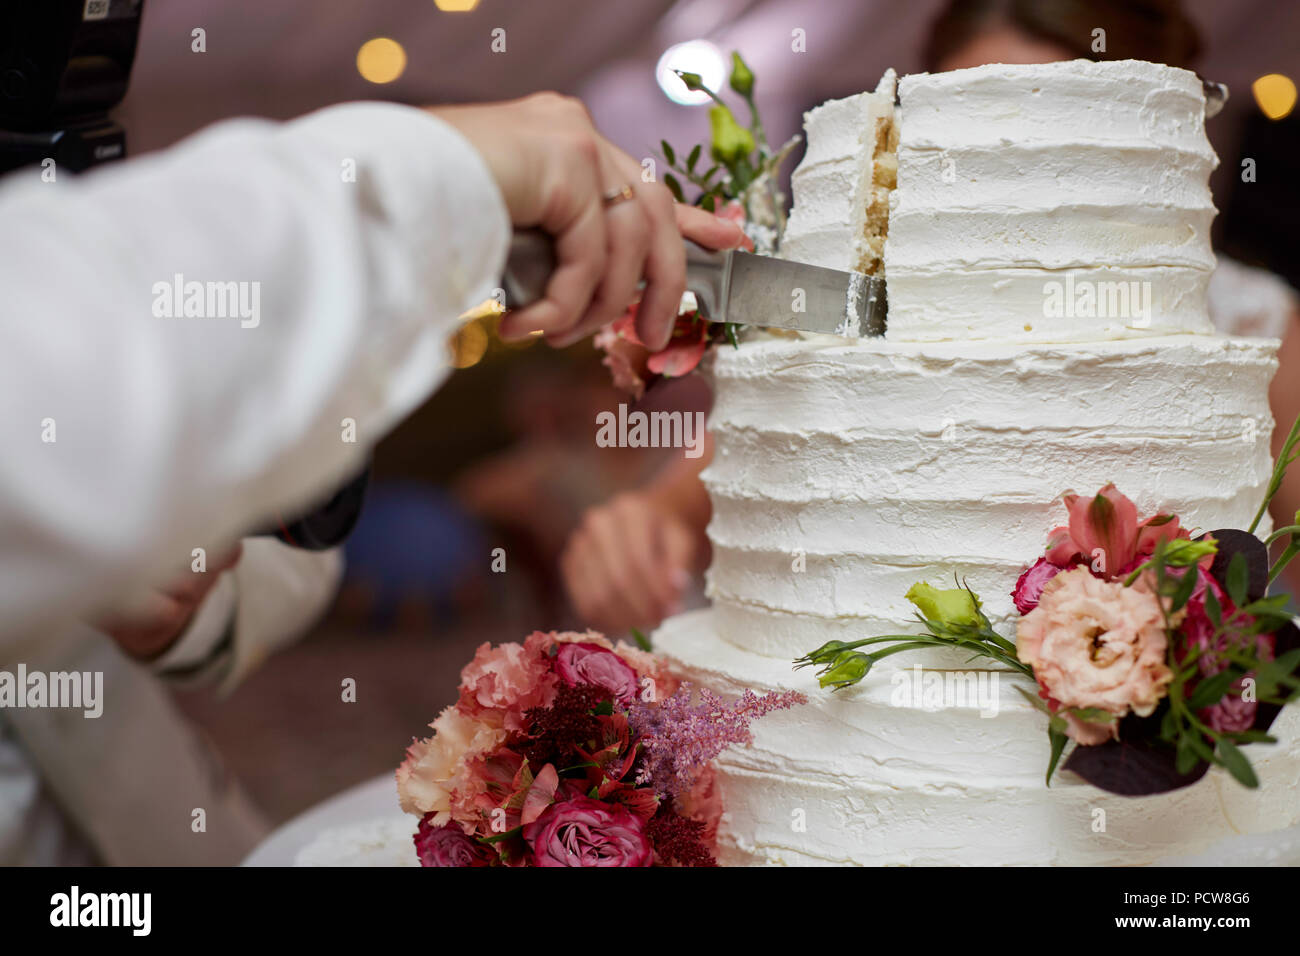 Bride and groom cutting elegant cake with roses Stock Photo